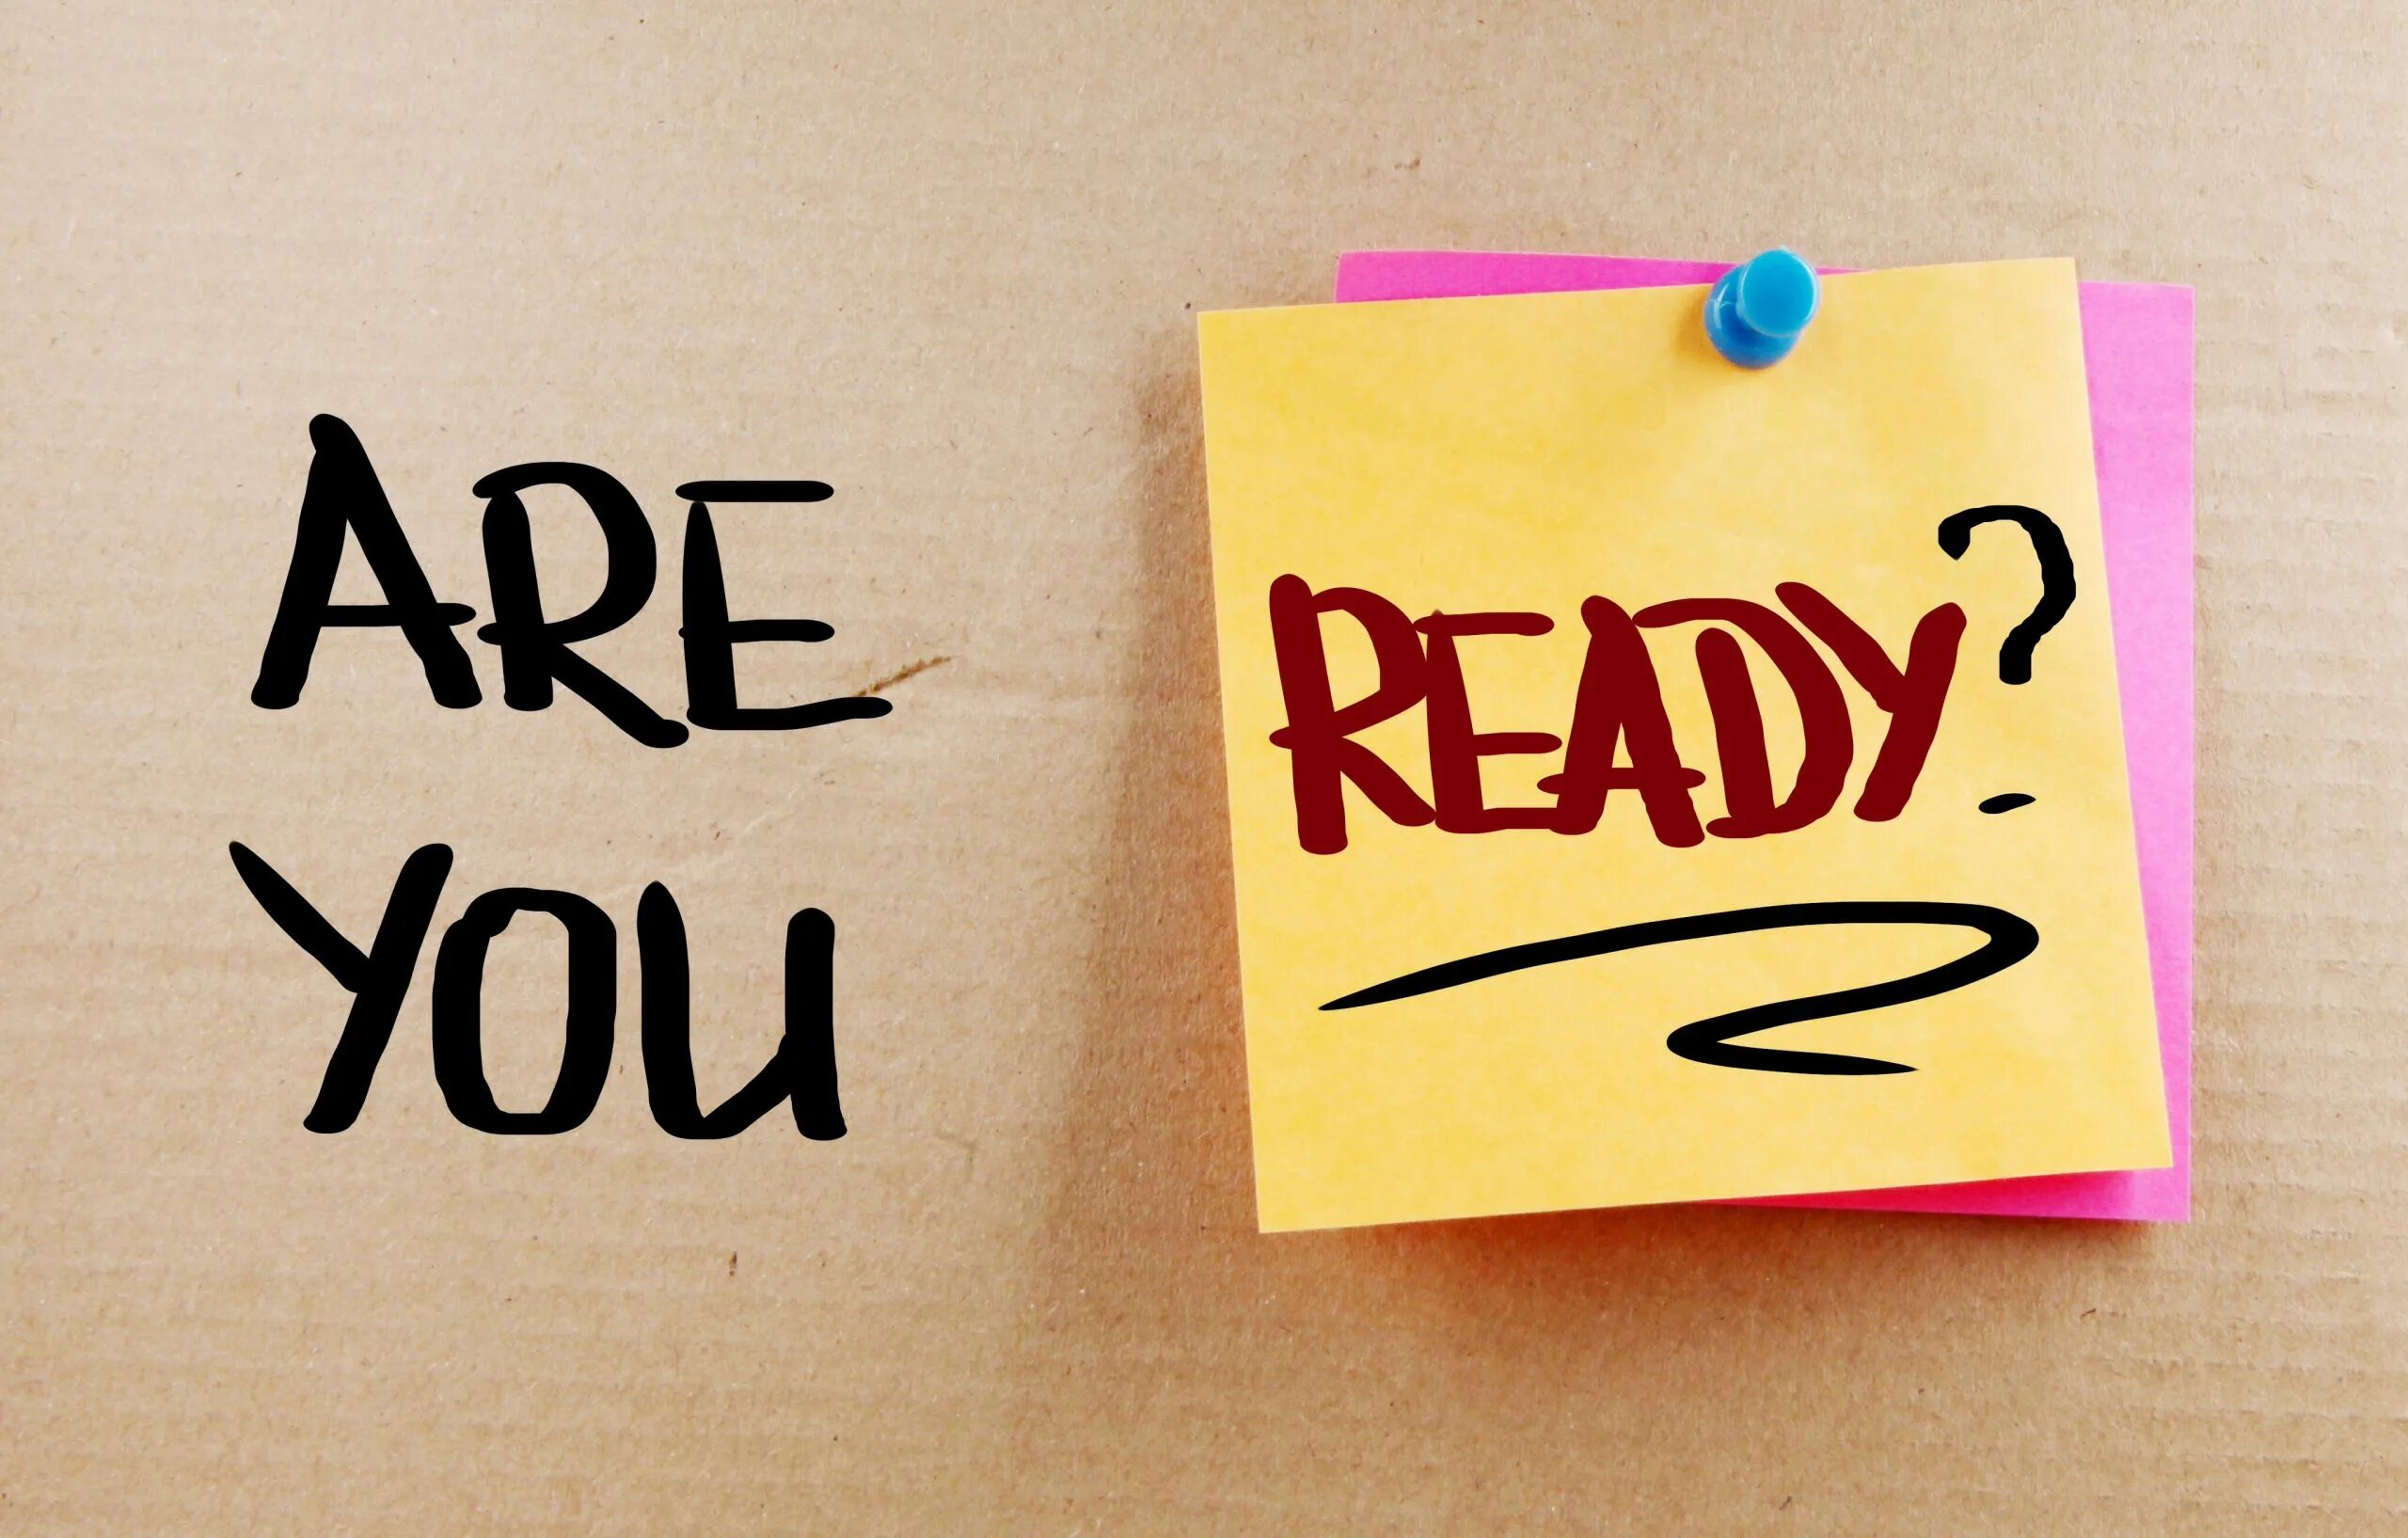 Are you ready. A you ready. Are you ready картинка. Are you ready надпись. Are you ready ordering